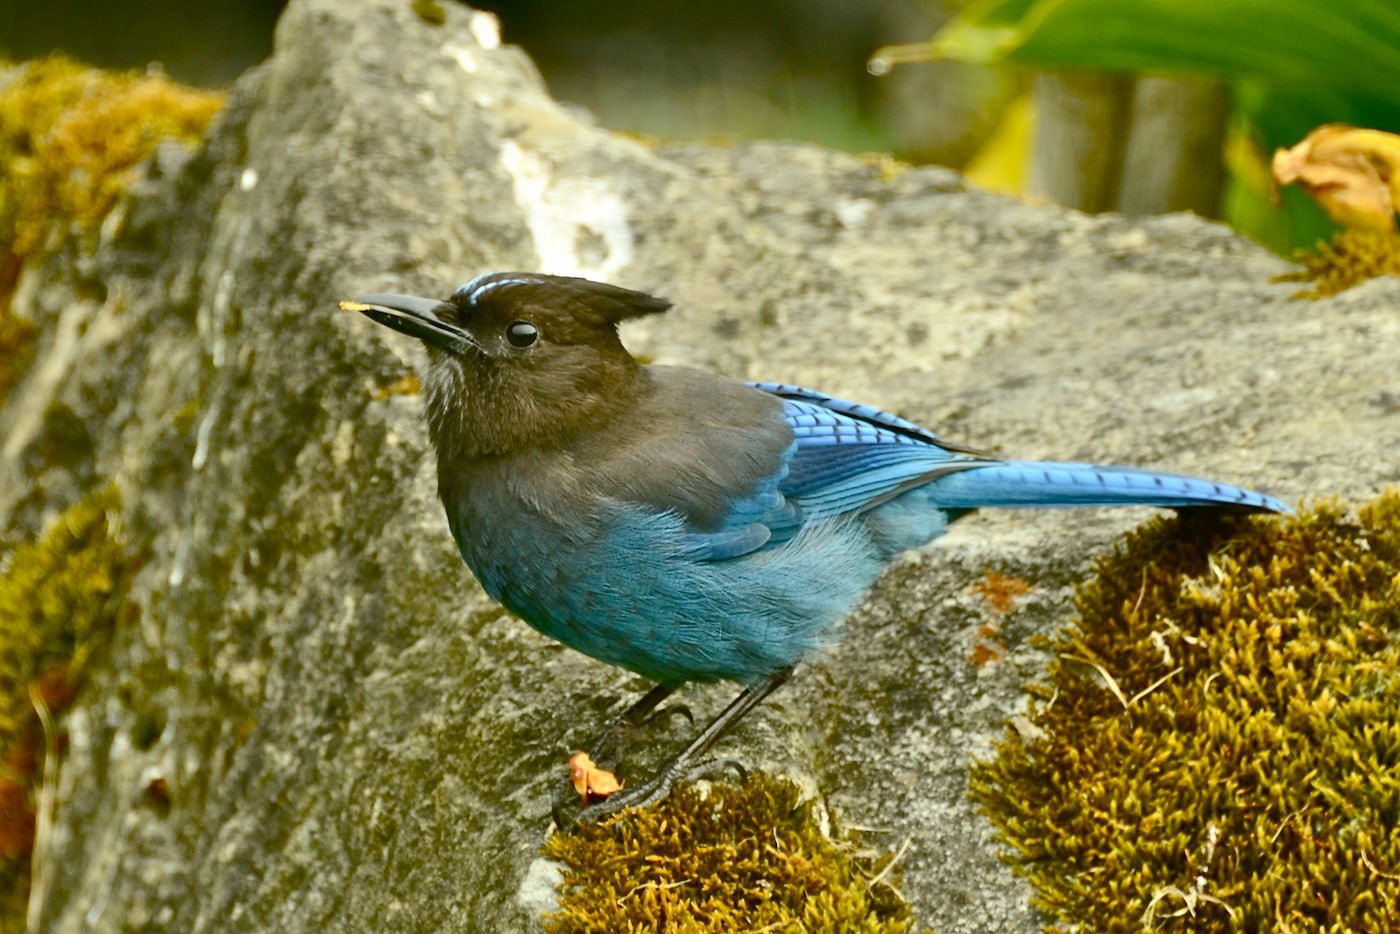 Steller's Jay. Photo by Linda Tanner, Flickr Creative Commons.